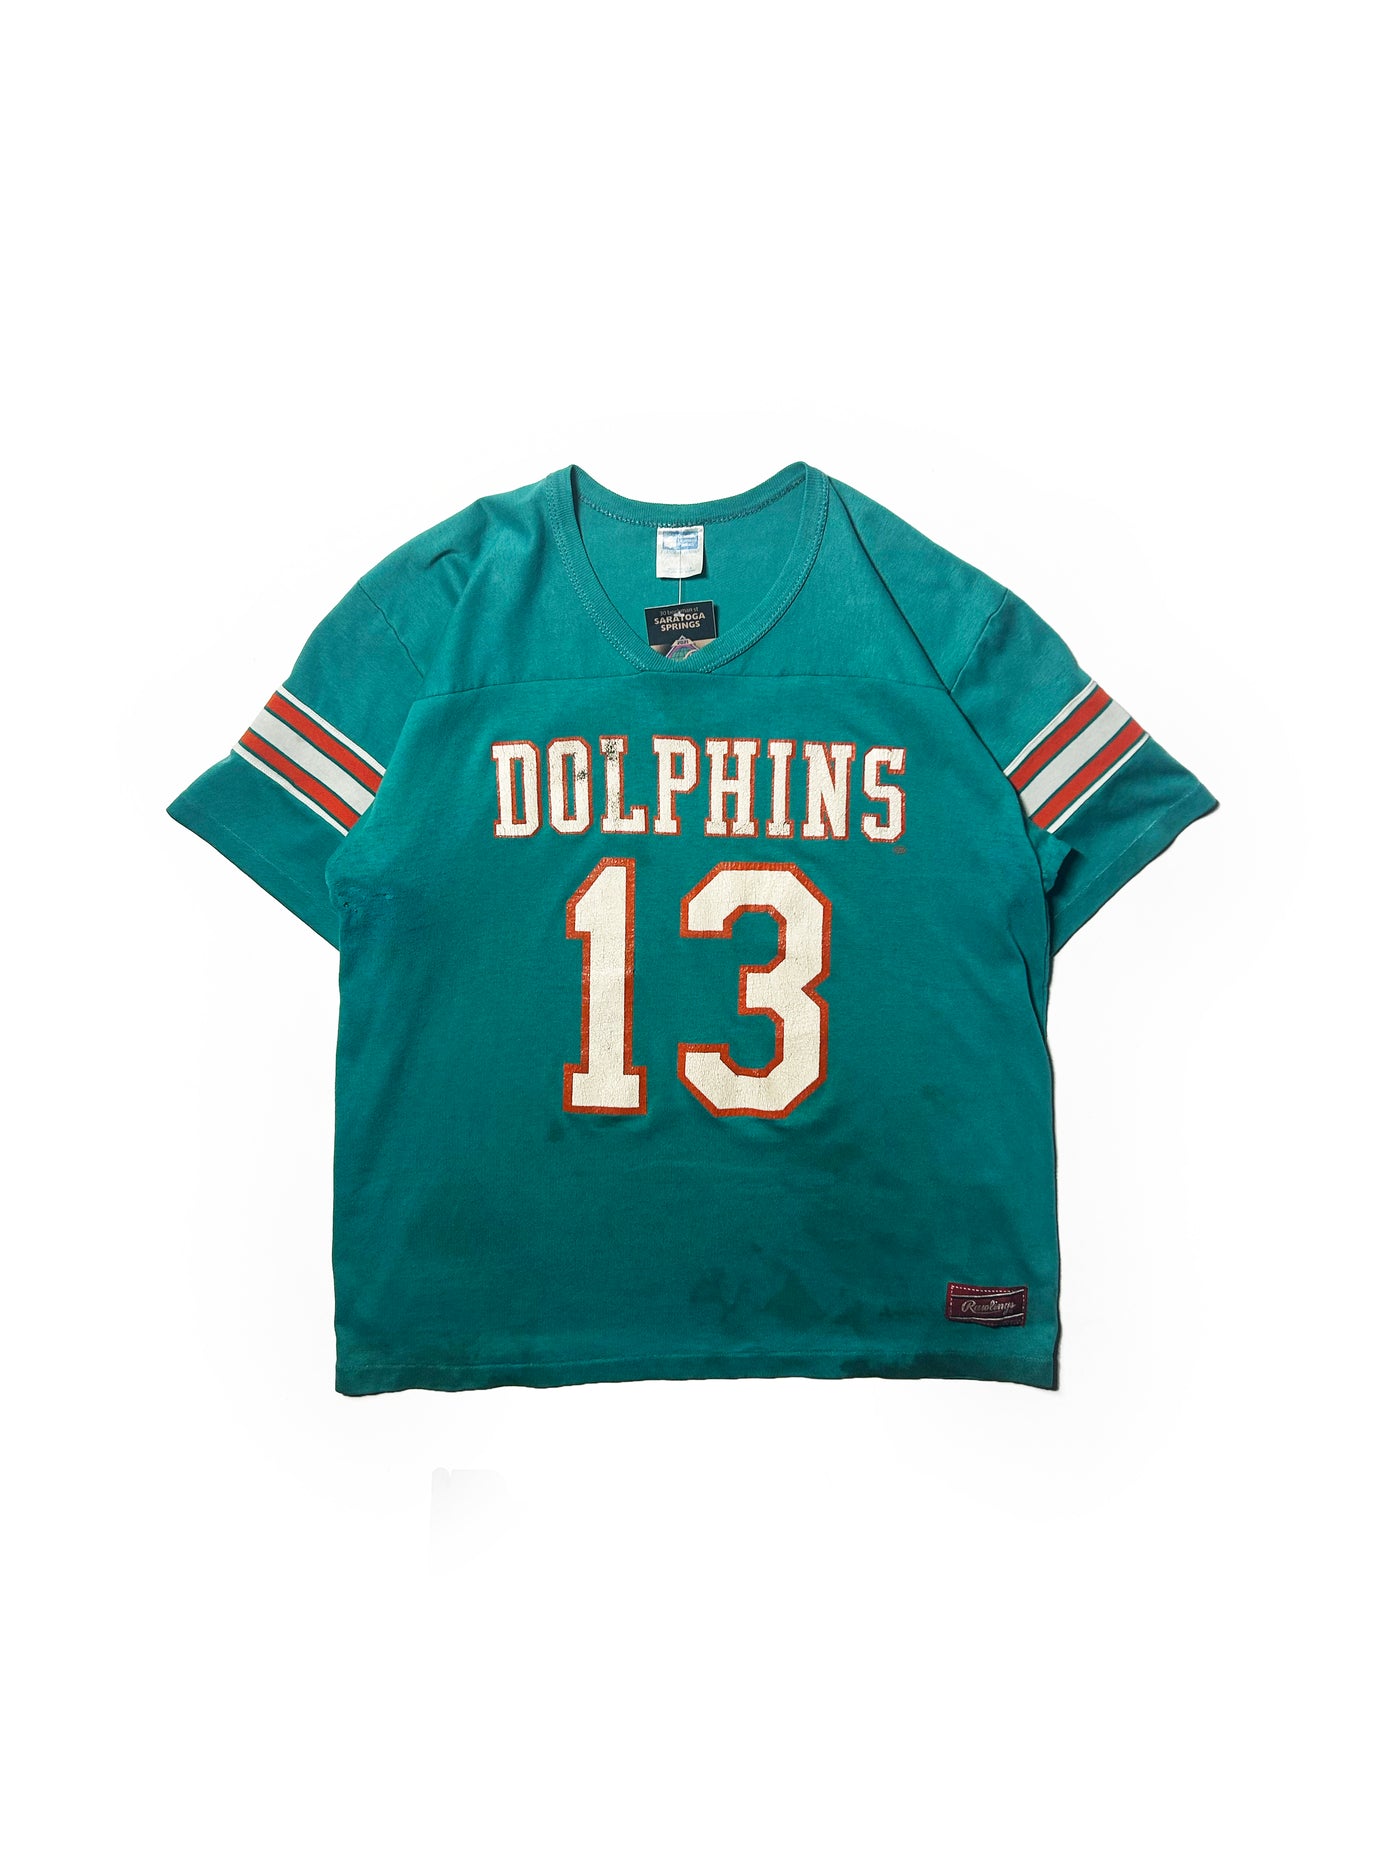 Vintage 80s Miami Dolphins Jersey Shirt